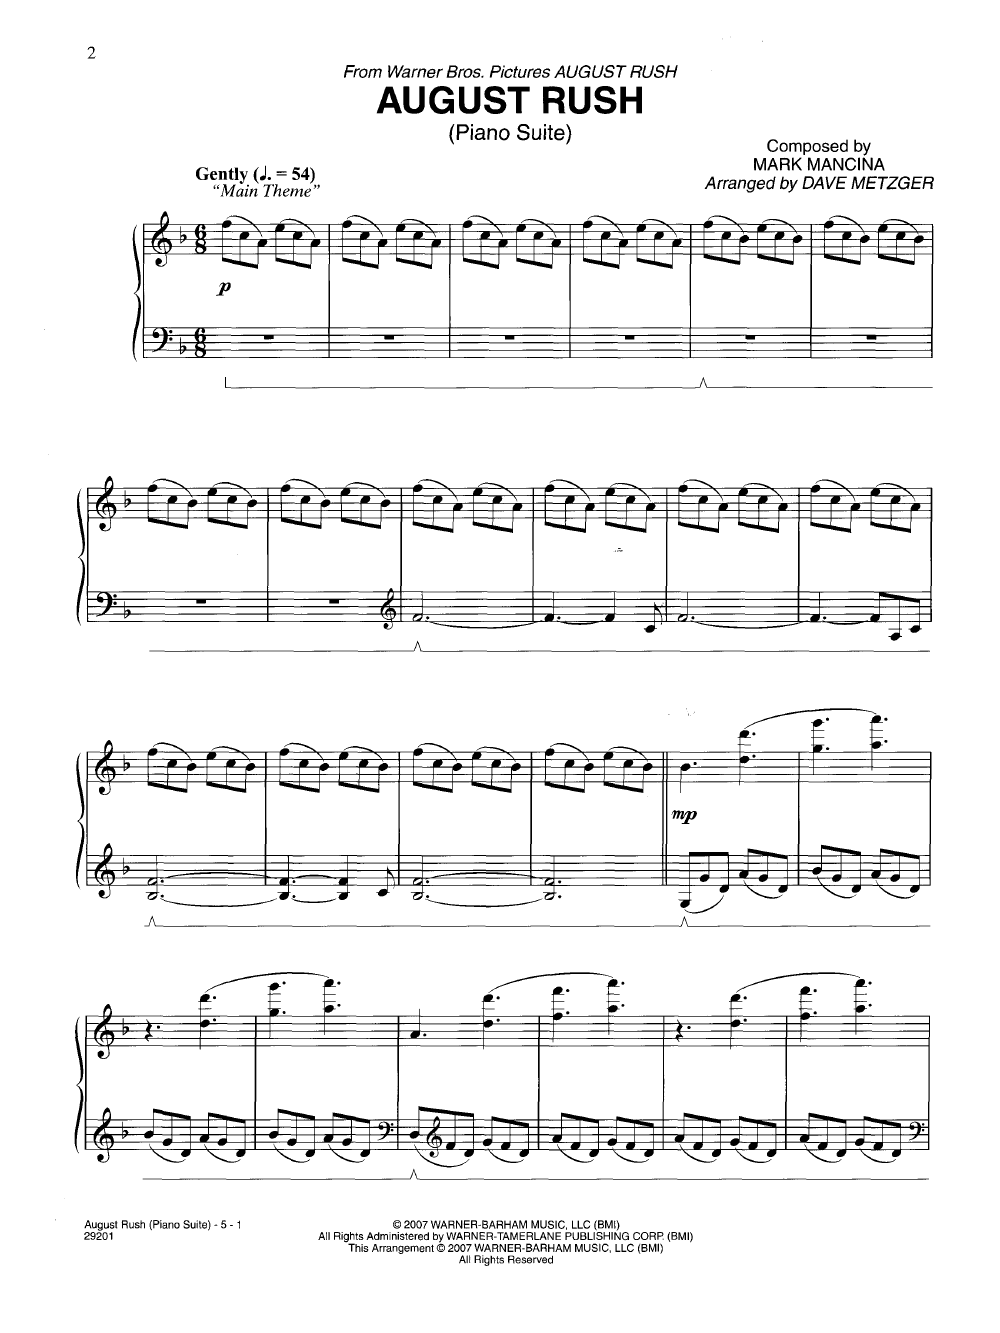 August Rush Piano Suite by VARIOUS| J.W. Pepper Sheet Music